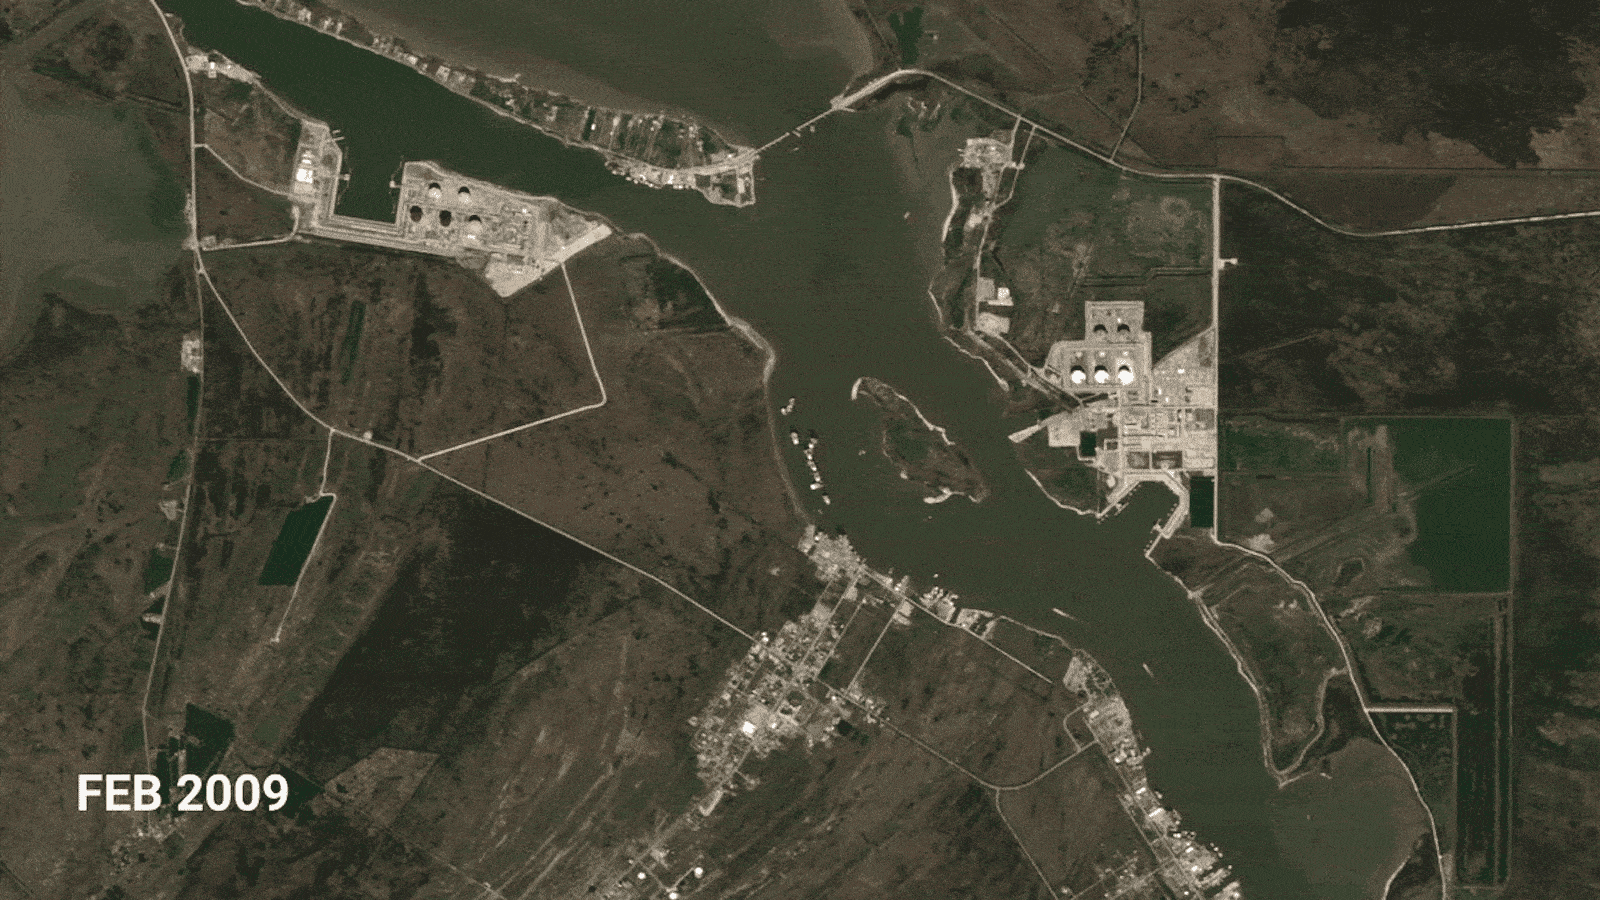 a satellite view of a river with two facilities being built over time